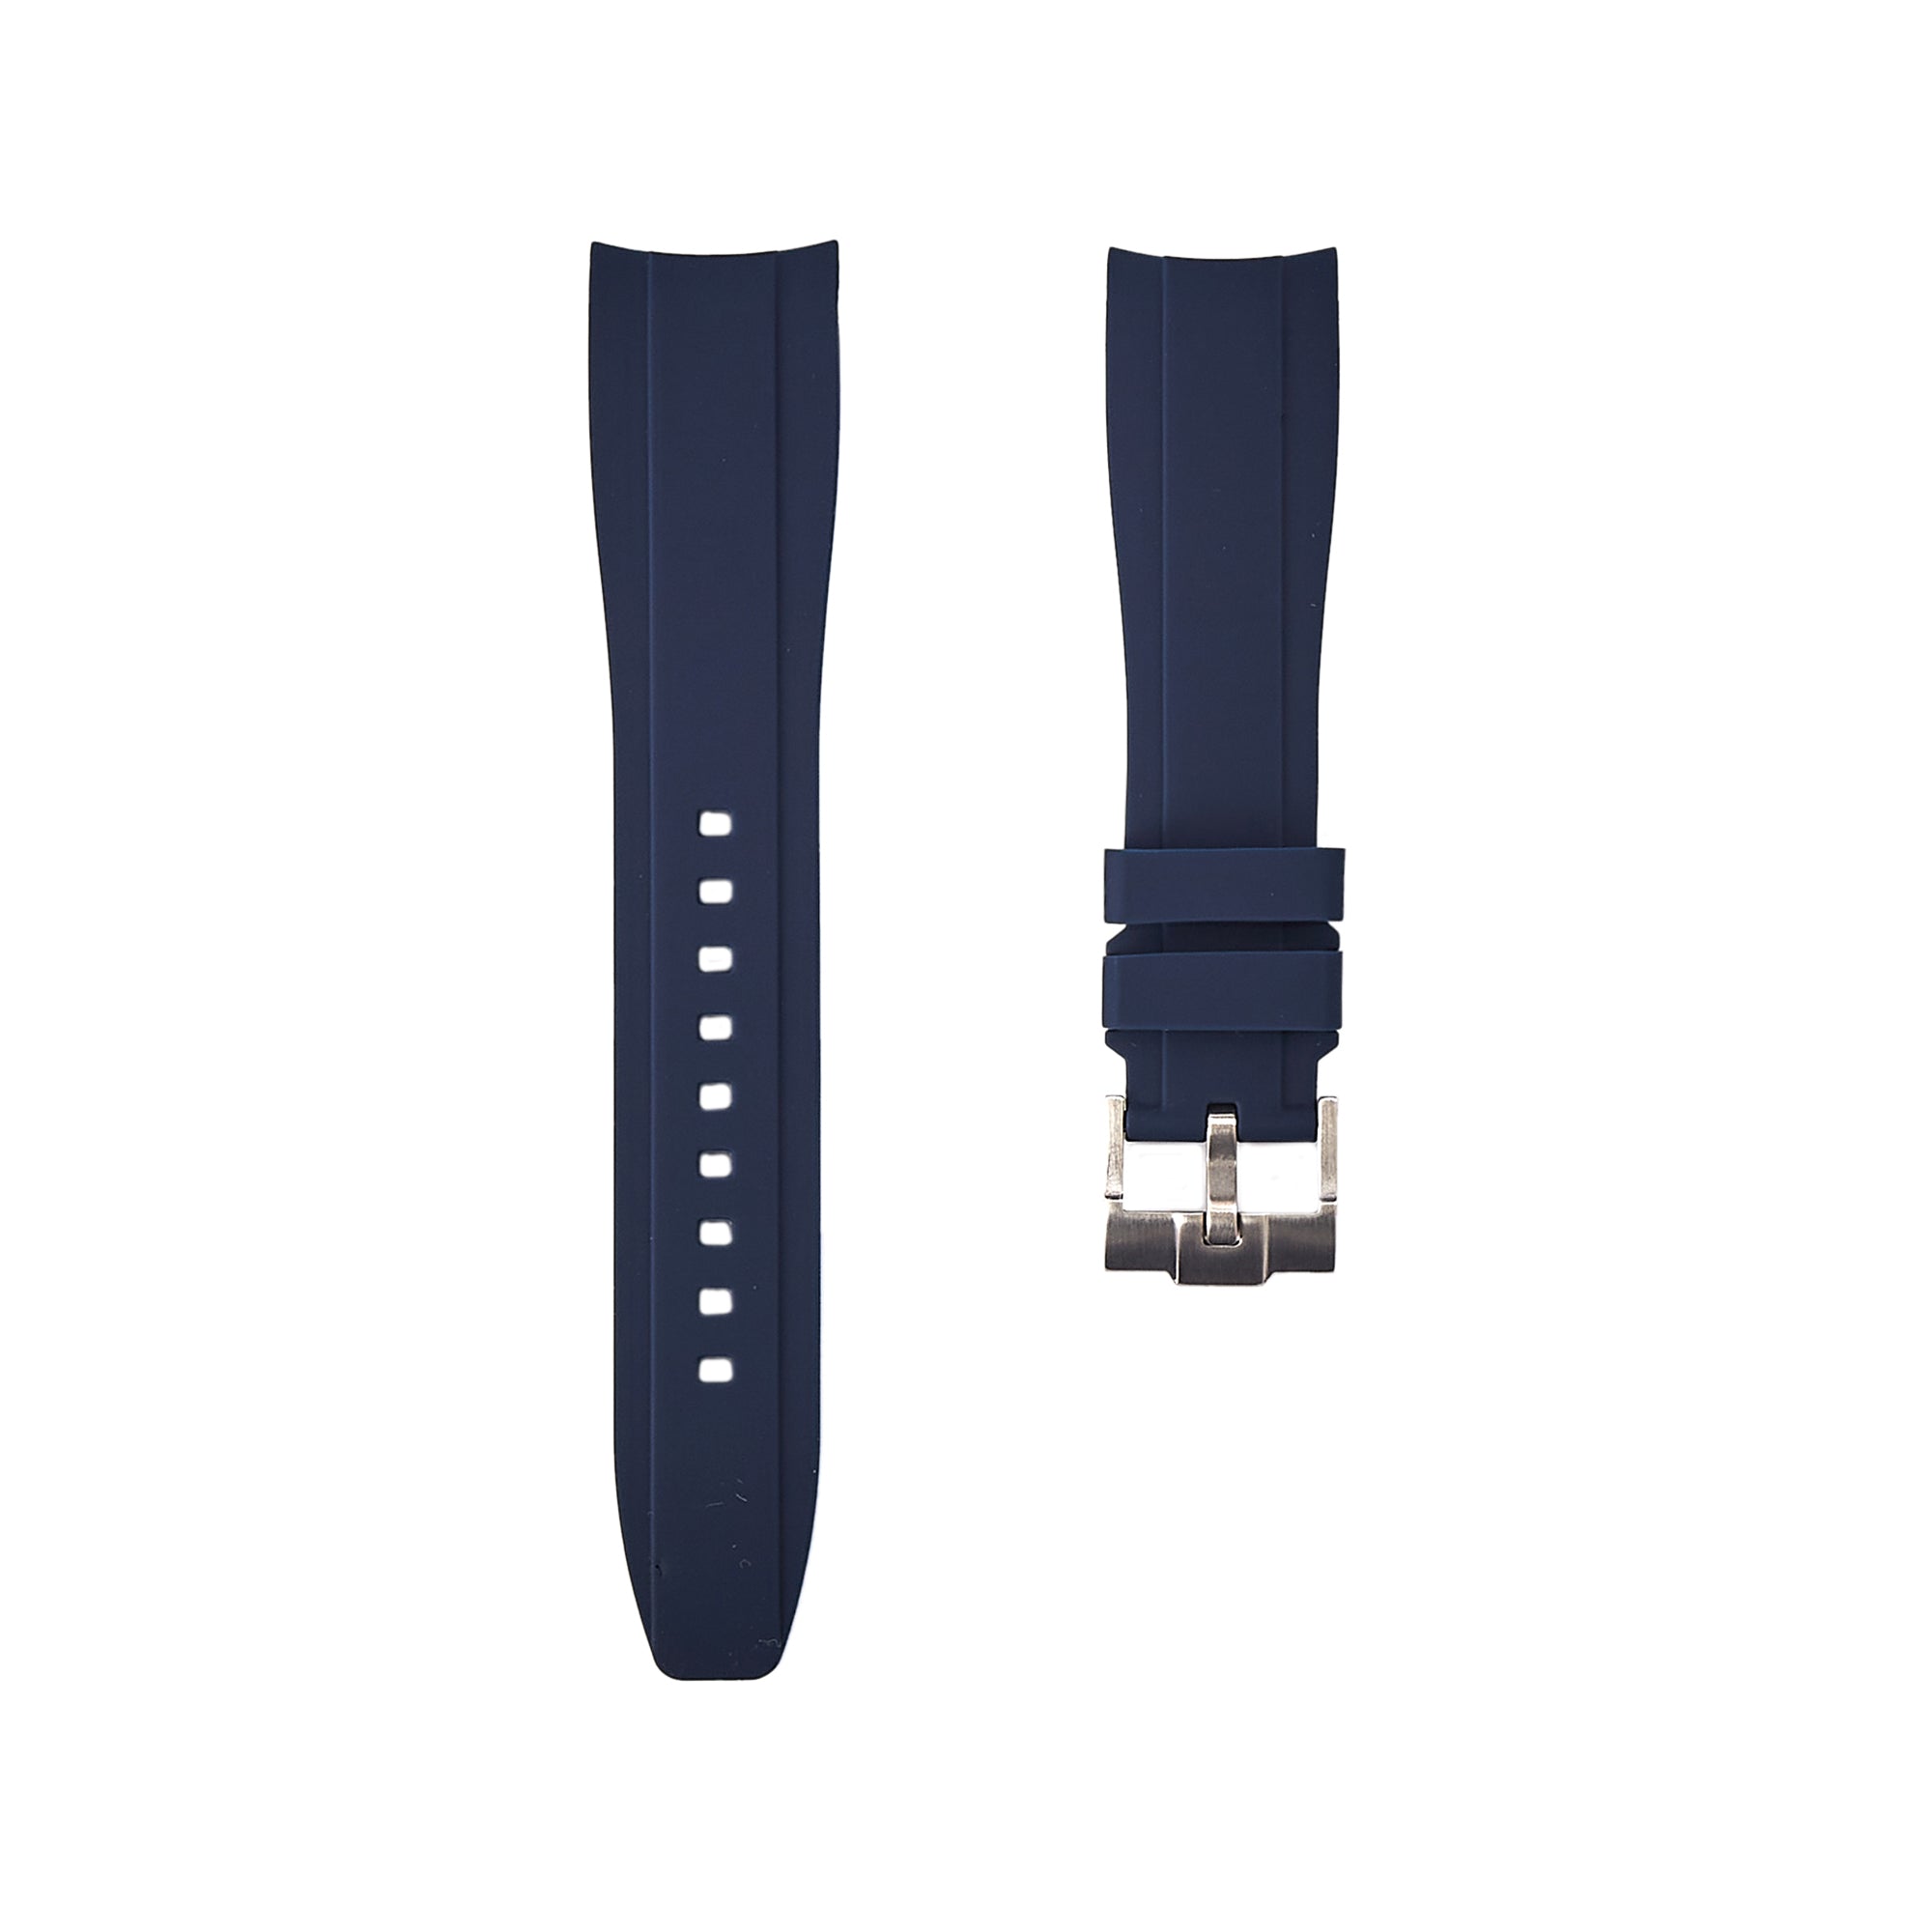 Curved End Soft Silicone Strap - Compatible with Rolex Submariner - Navy (2418) -StrapSeeker